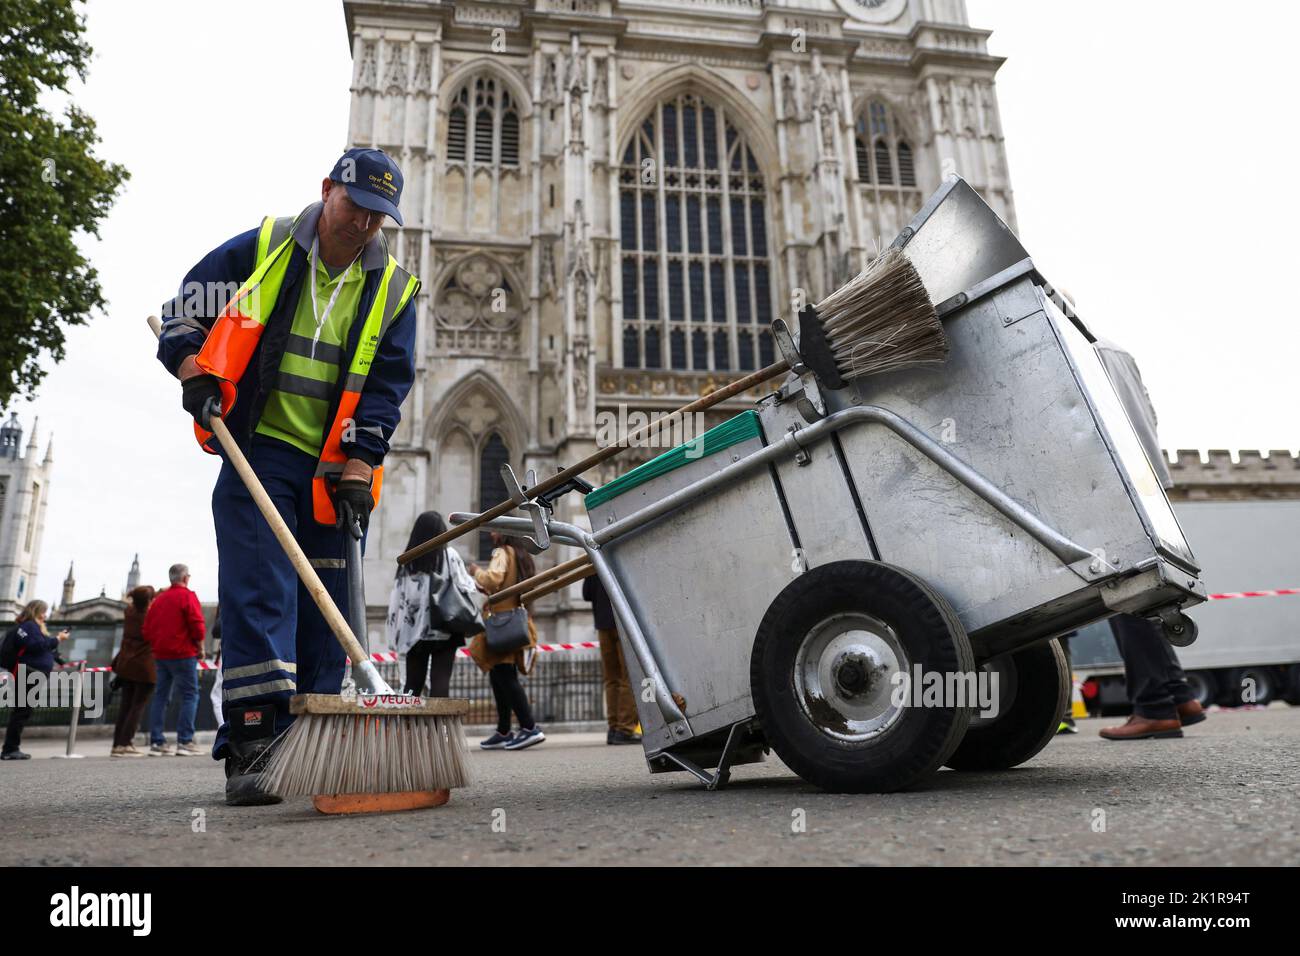 A cleaner sweeps a street outside Westminster Abbey, following the funeral of Britain's Queen Elizabeth, in London, Britain September 20, 2022. REUTERS/Tom Nicholson Stock Photo